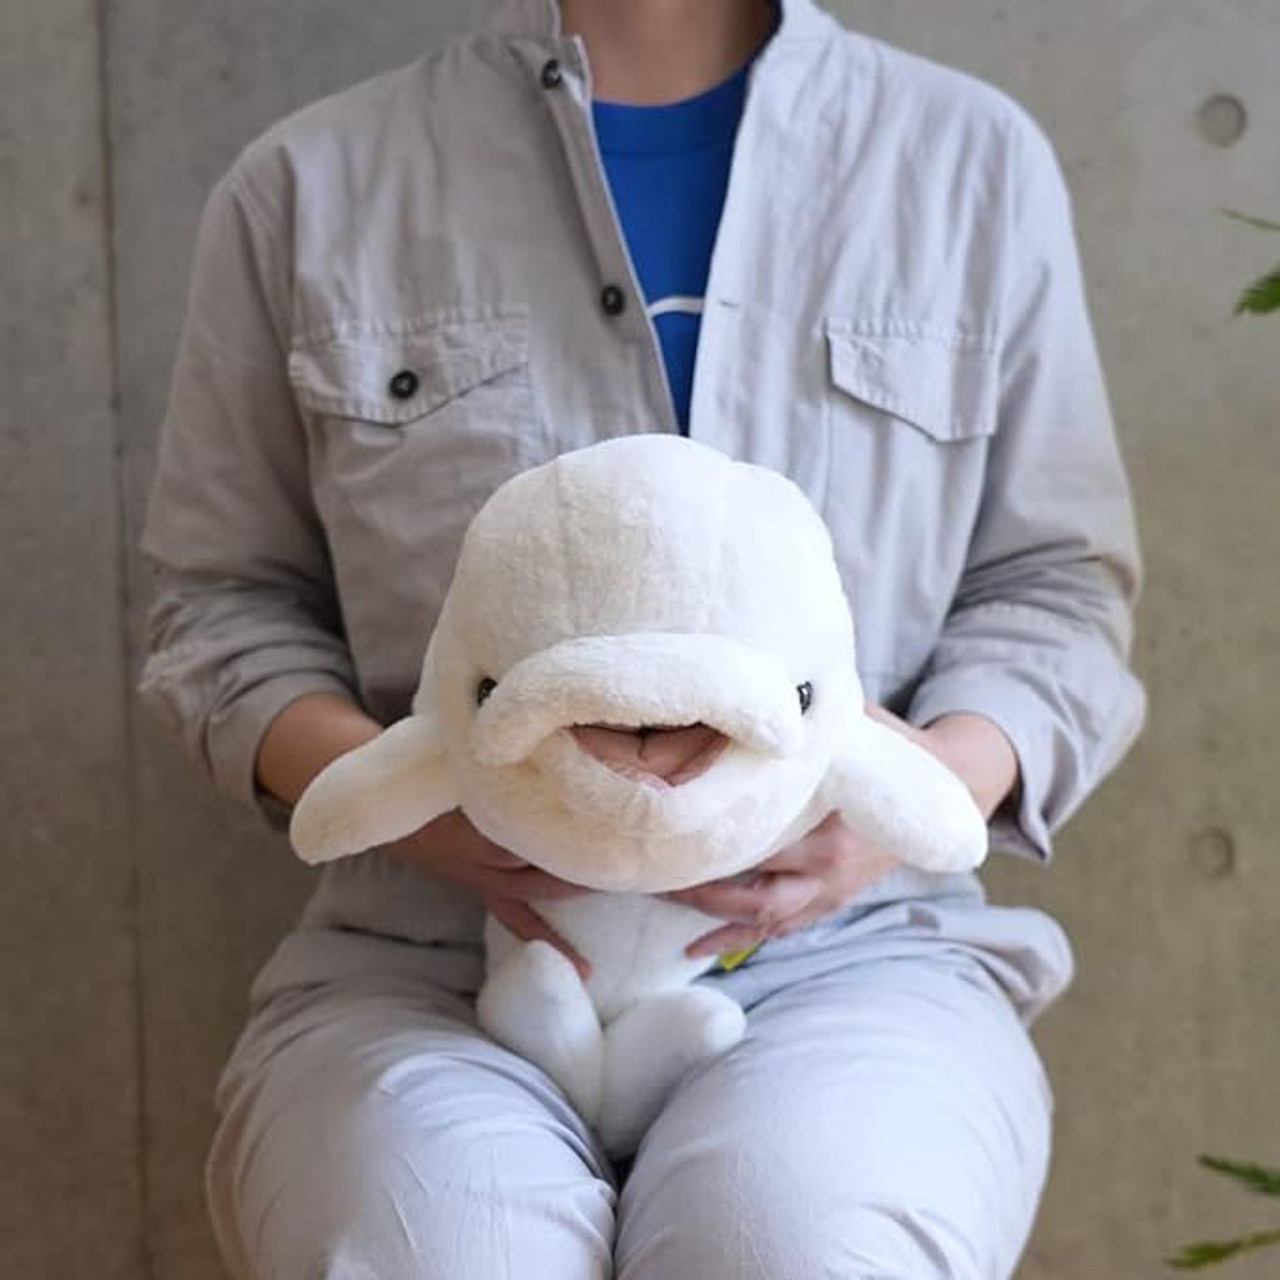 Beluga on X: My limited edition Begula plush will release on Feb 3 @ 3pm  EST!! don't miss it 😎  / X